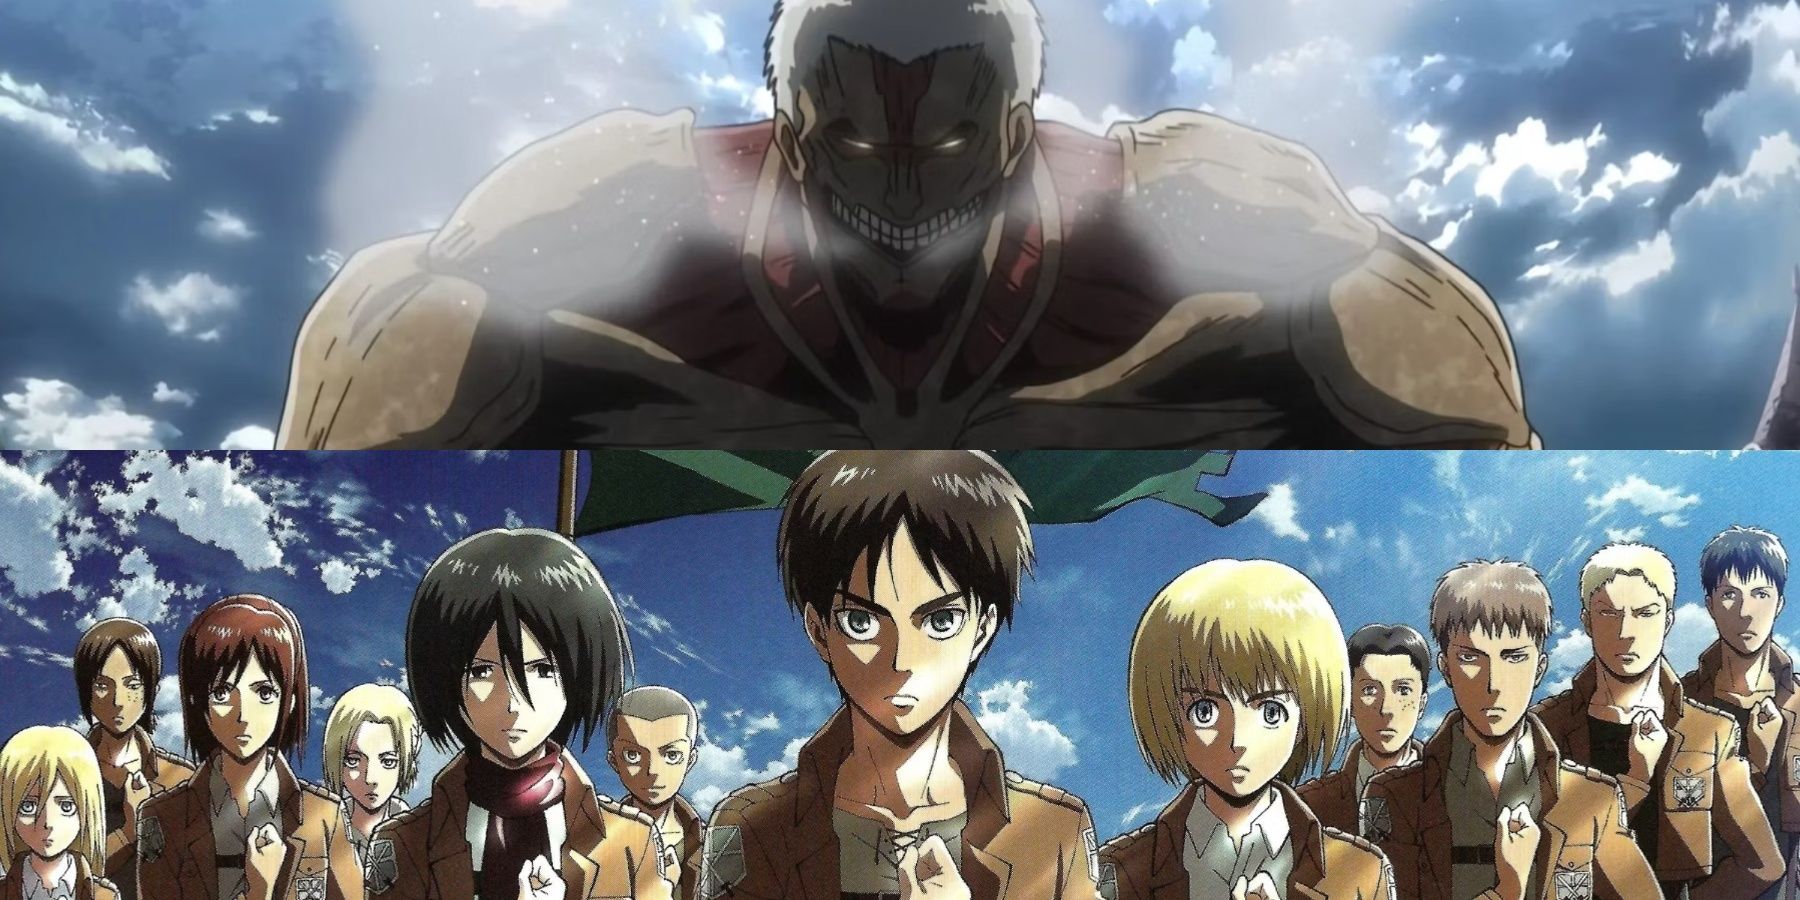 Dexerto on X: Fan created an entire game for Attack on Titan where you  fight Titans online with friends  / X